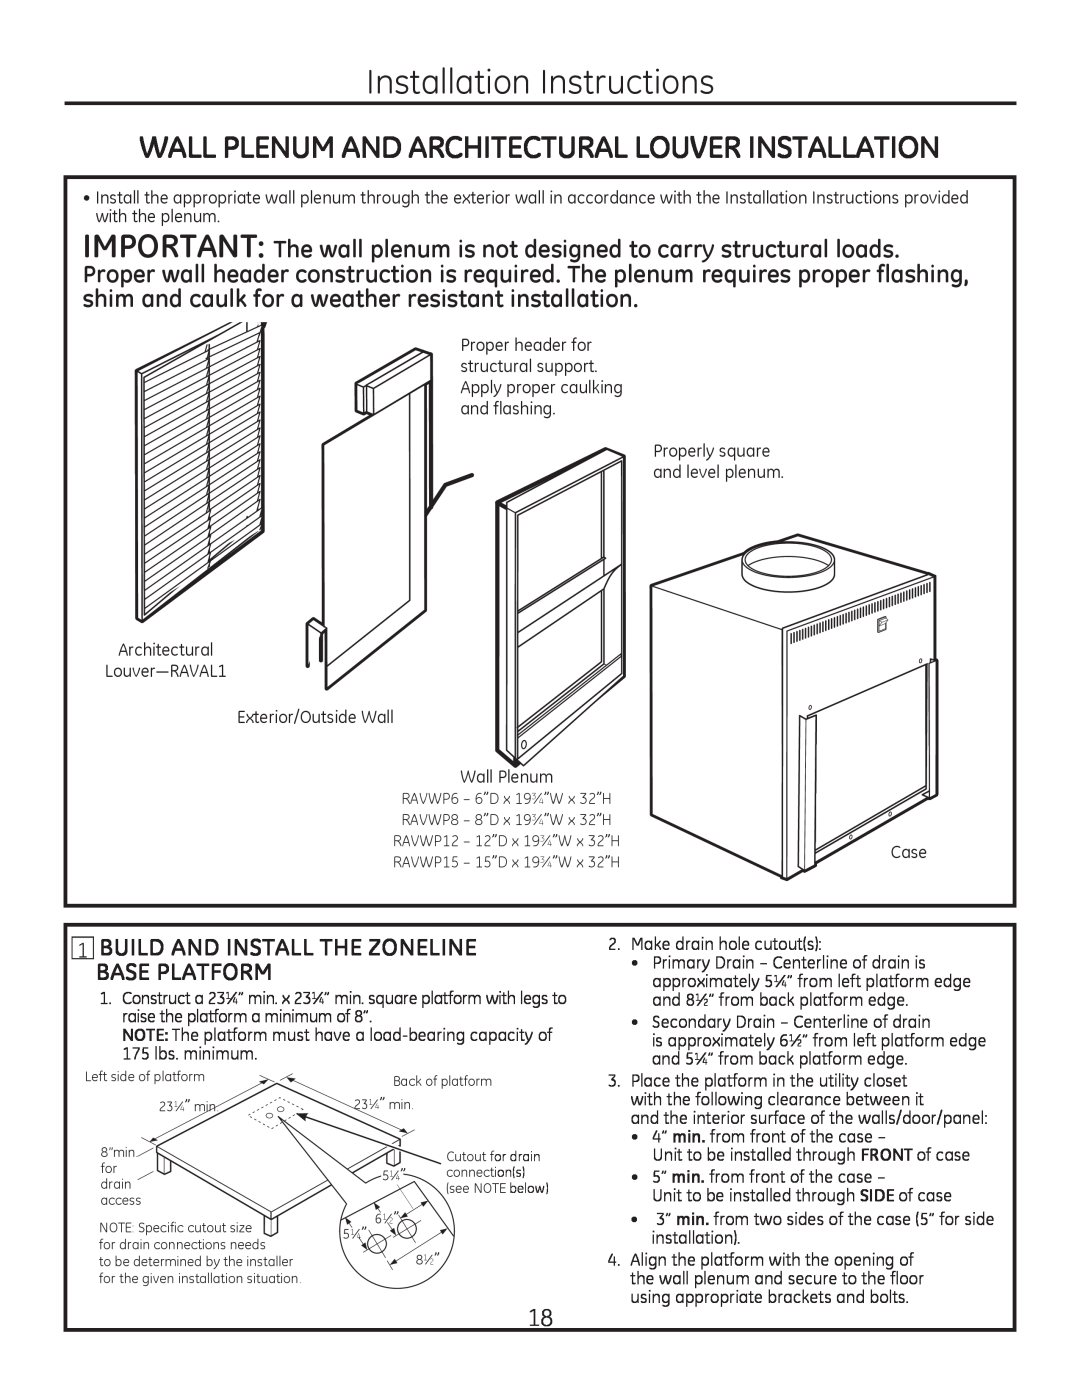 GE 8500 Series installation instructions Installation Instructions, Wall Plenum And Architectural Louver Installation 